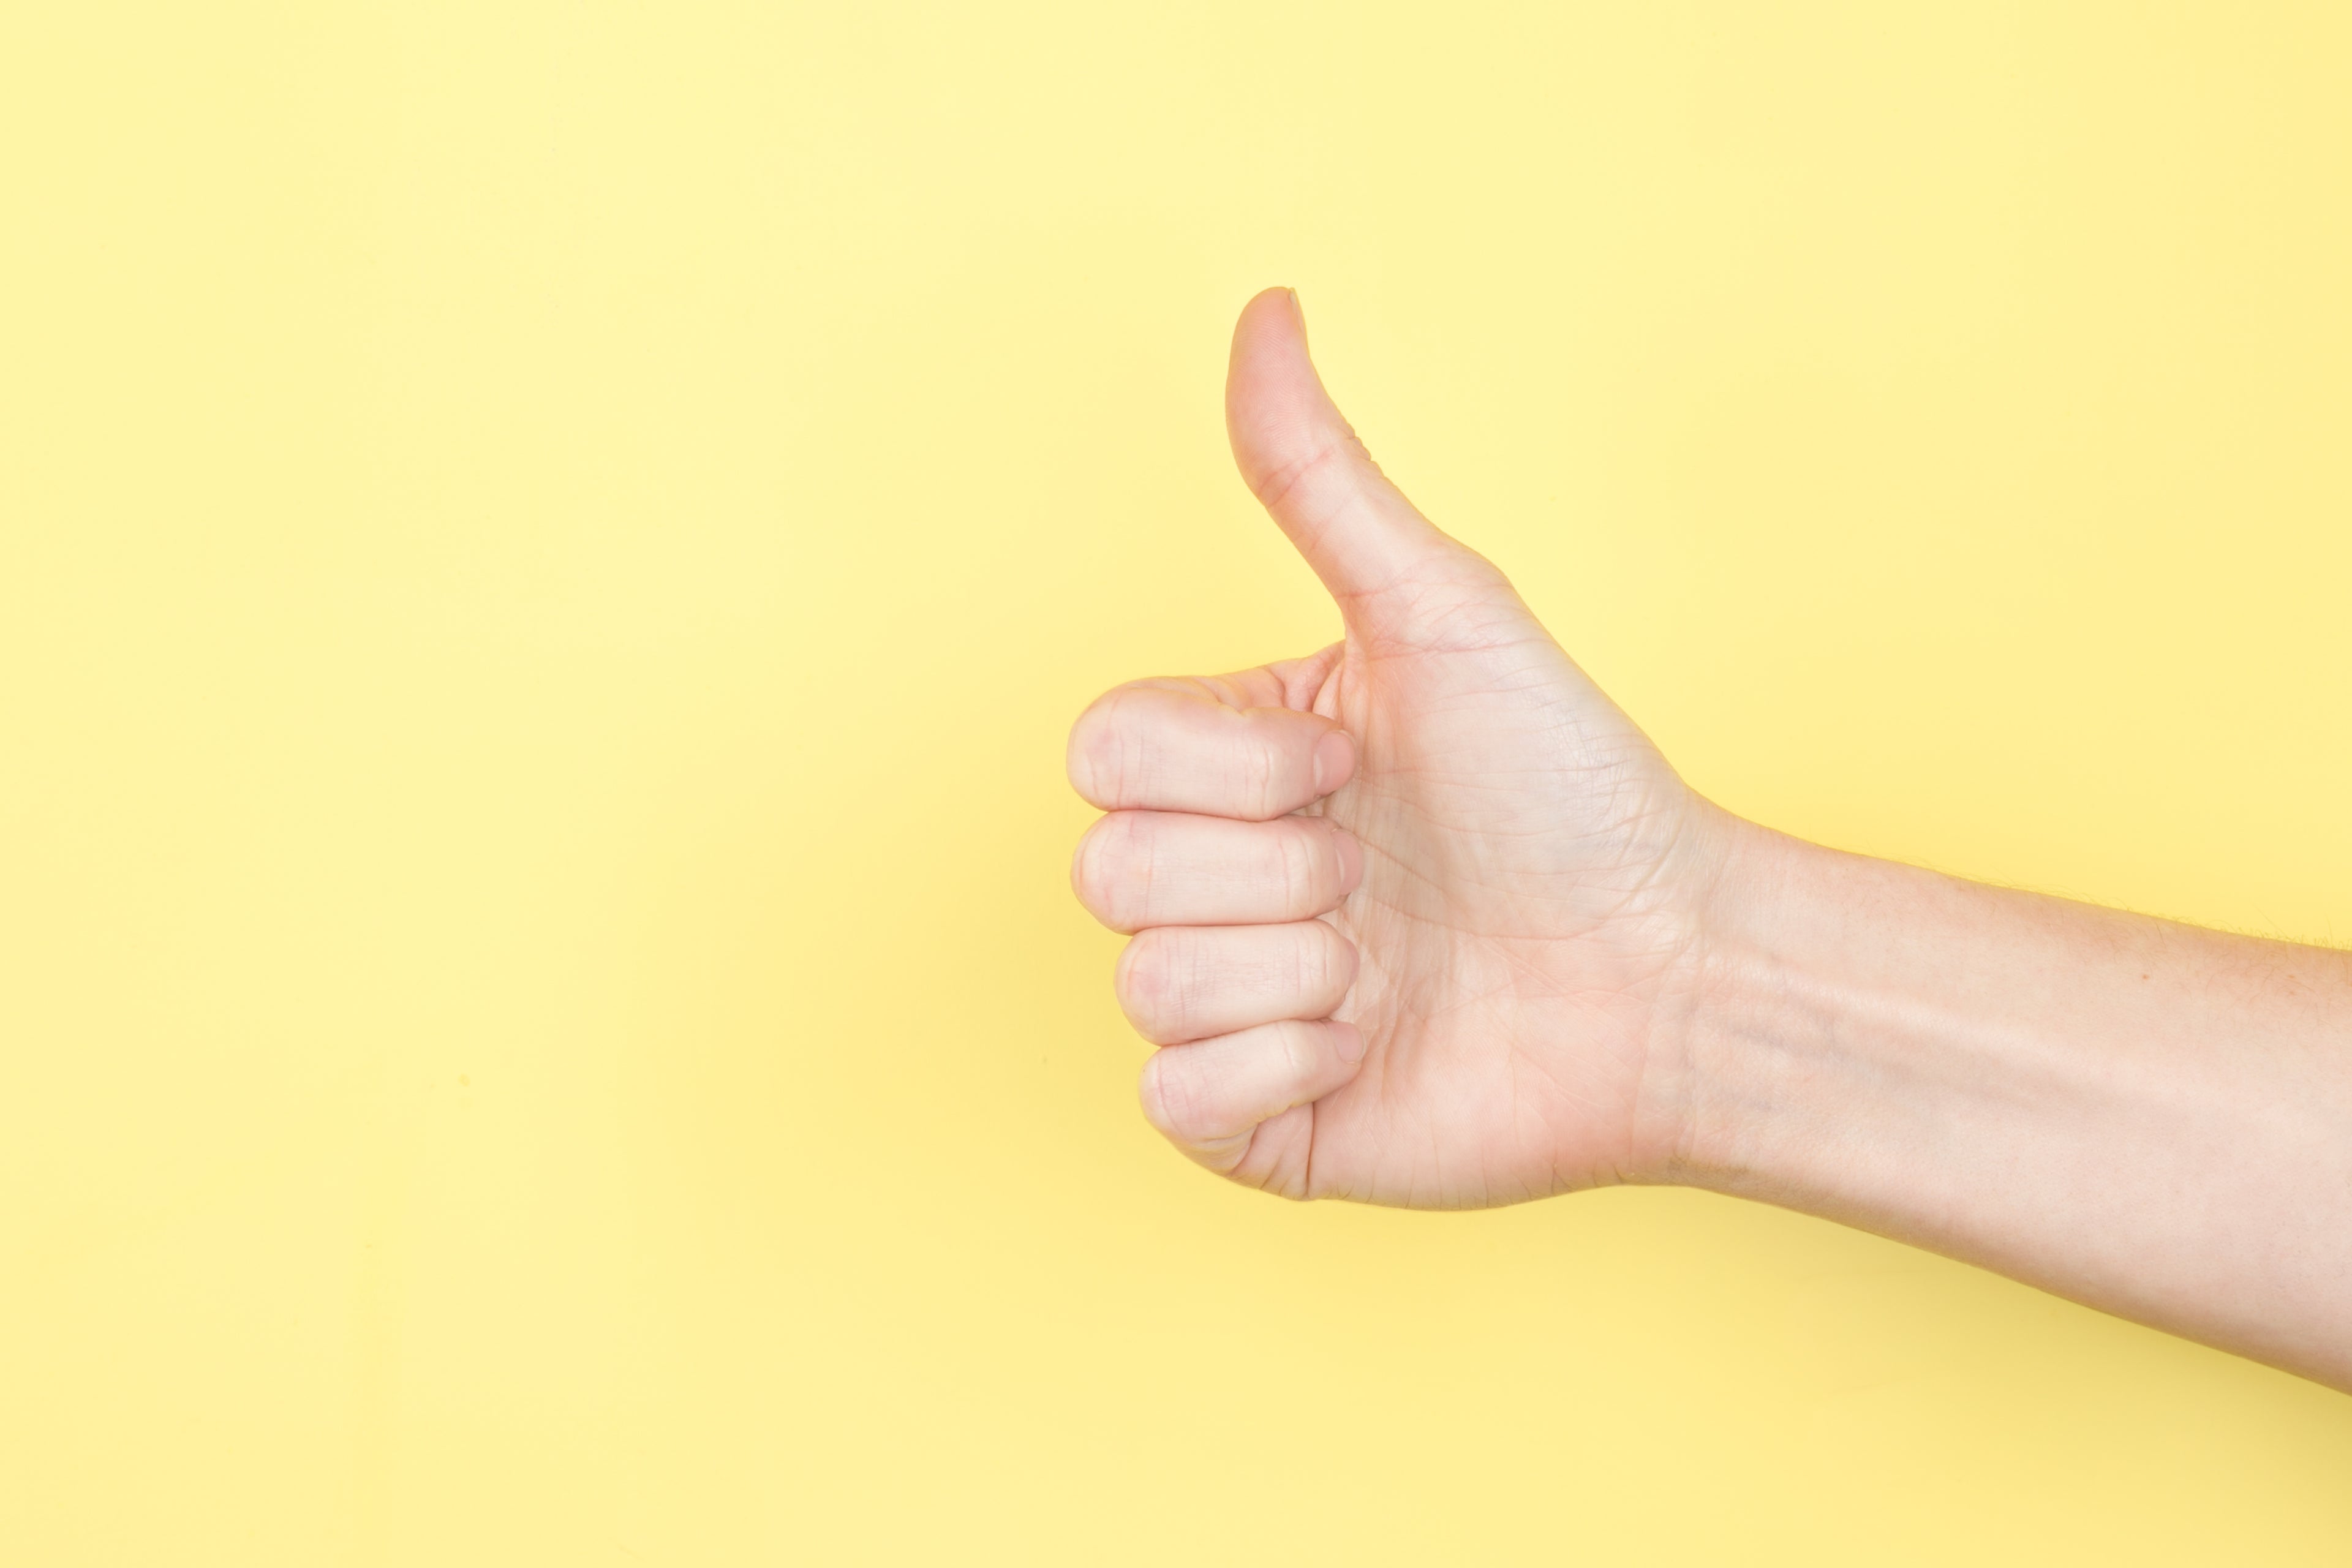 The Stamina for Men footer image showing a thumbs up on a yellow background